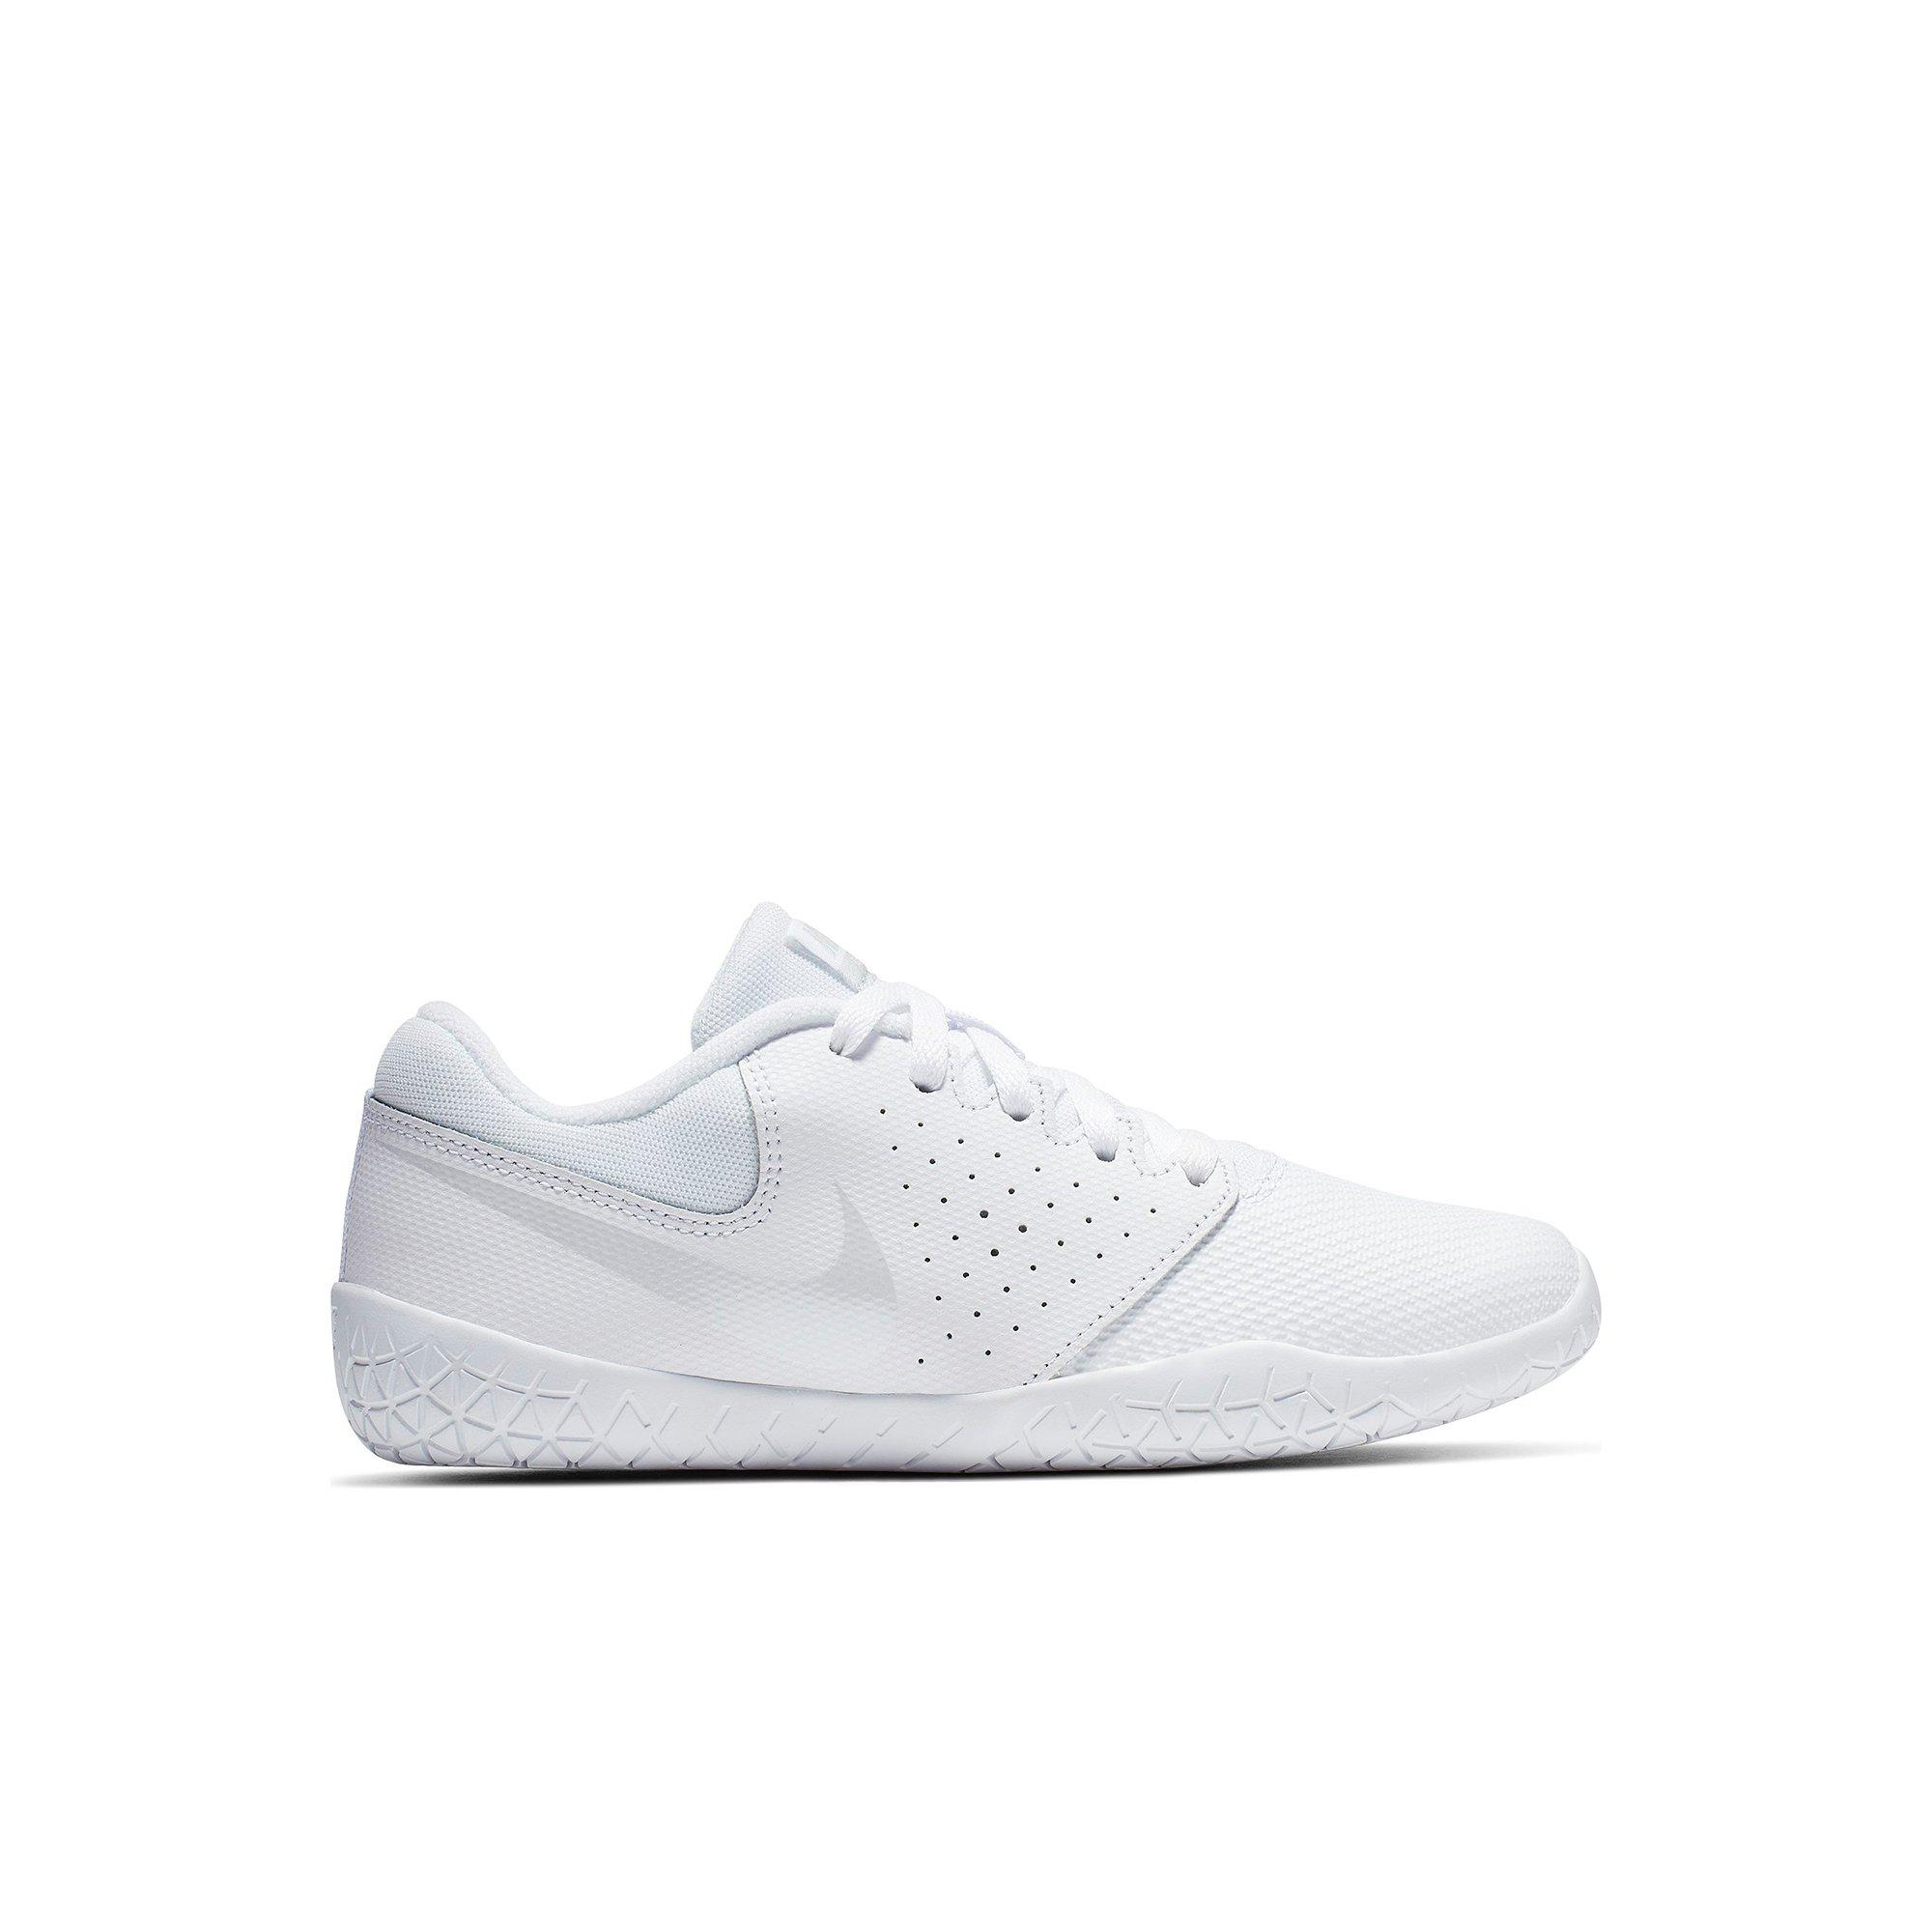 nike sideline cheer shoes youth